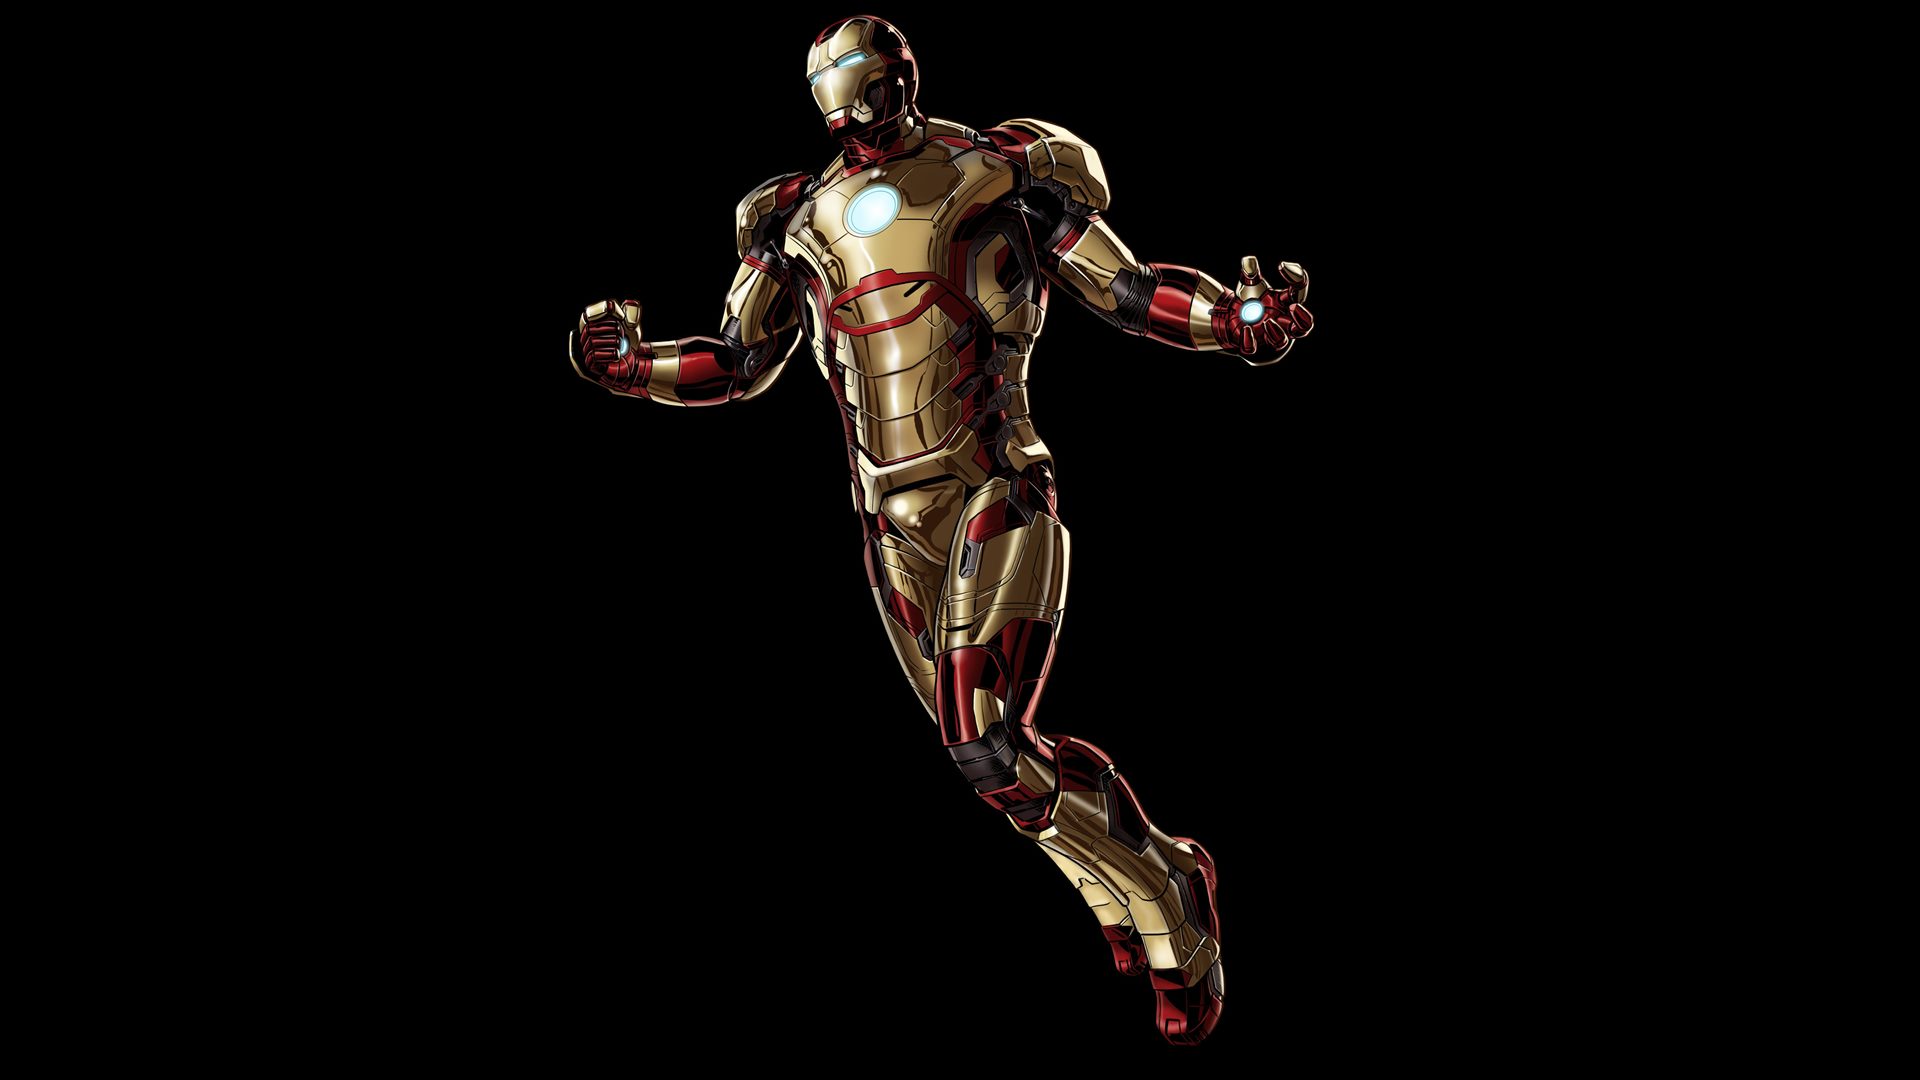 HD Wallpapers Of Iron Man